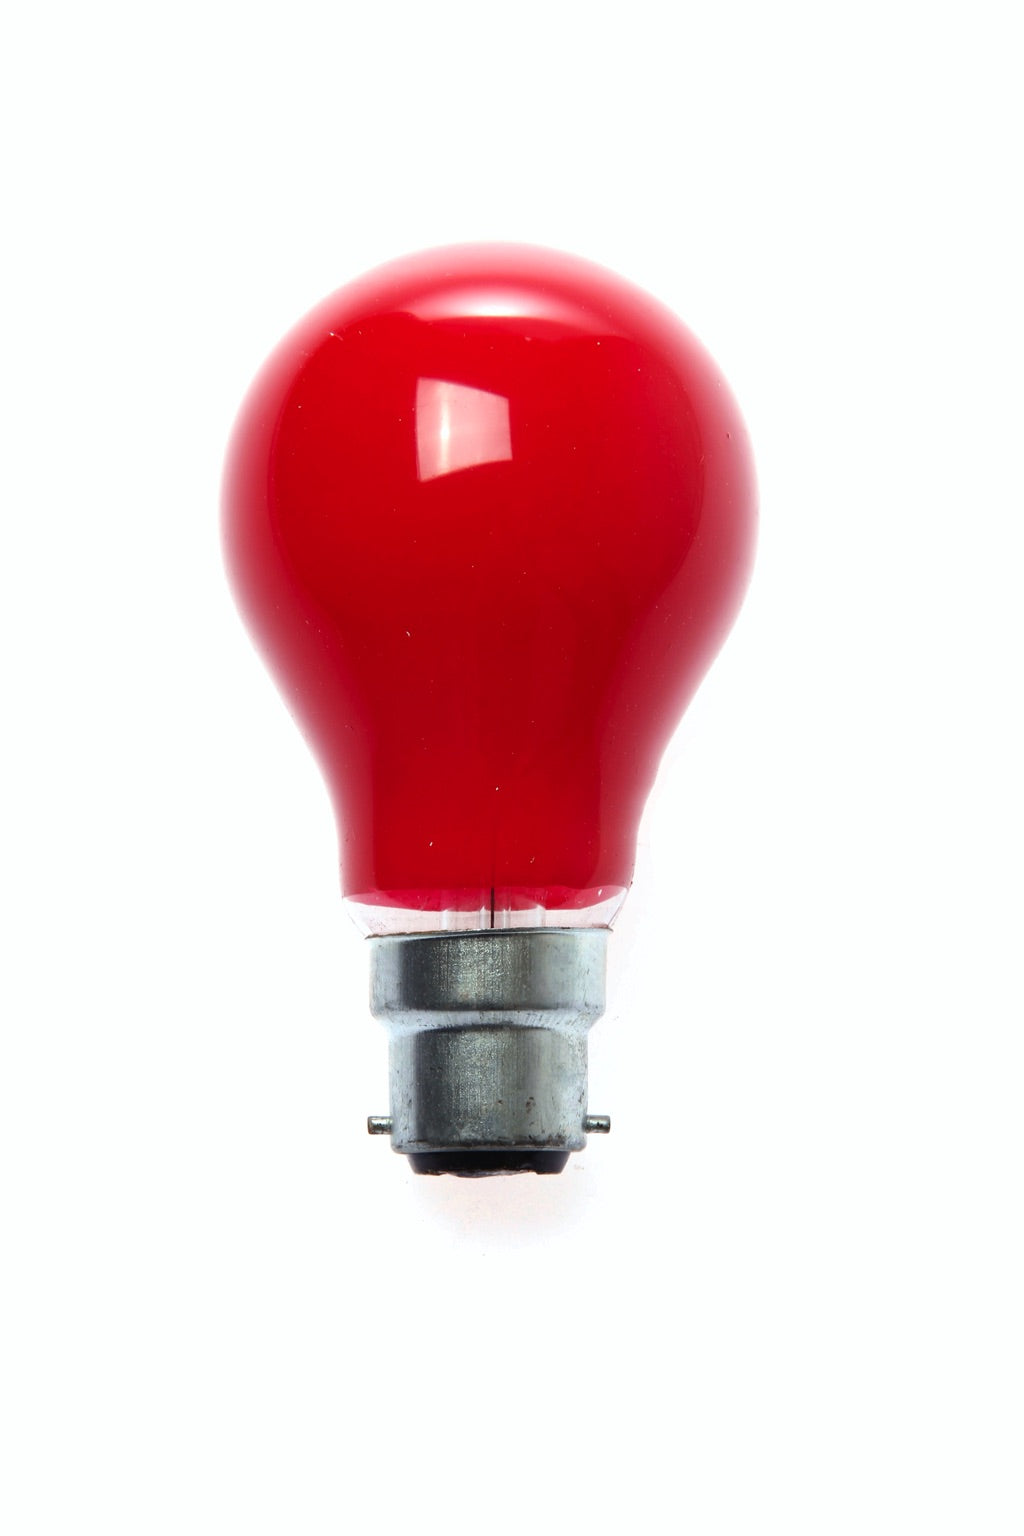 790348-LAMP COLORED B-22, 220-240V 60W RED